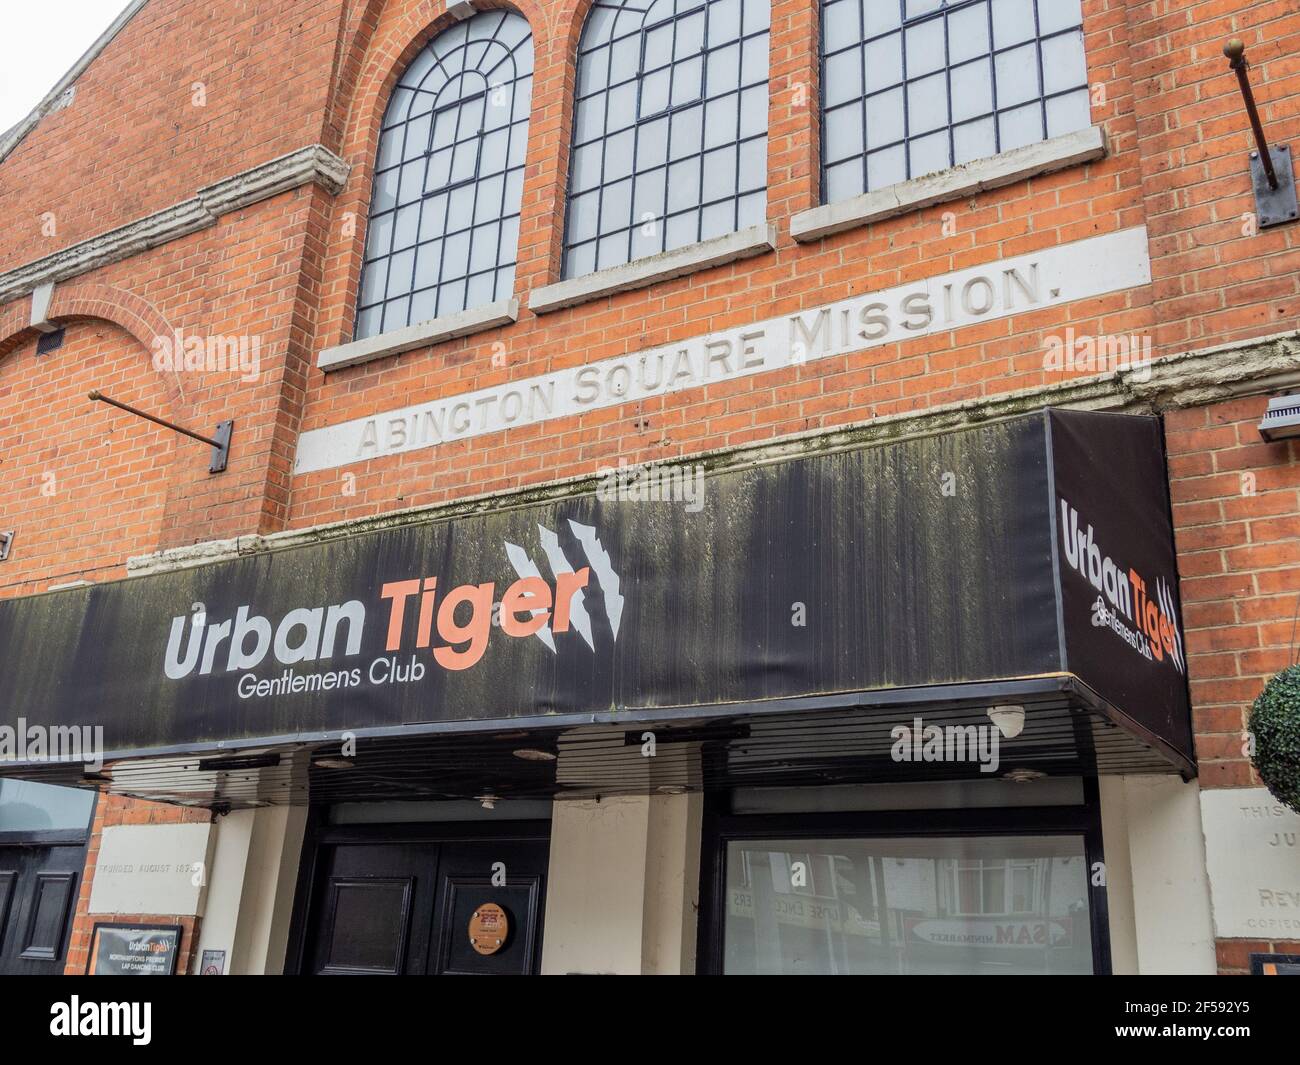 Frontage of Urban Tiger Gentleman's Club situated in a former Mission Hall, Abington Square, Northampton, UK Stock Photo